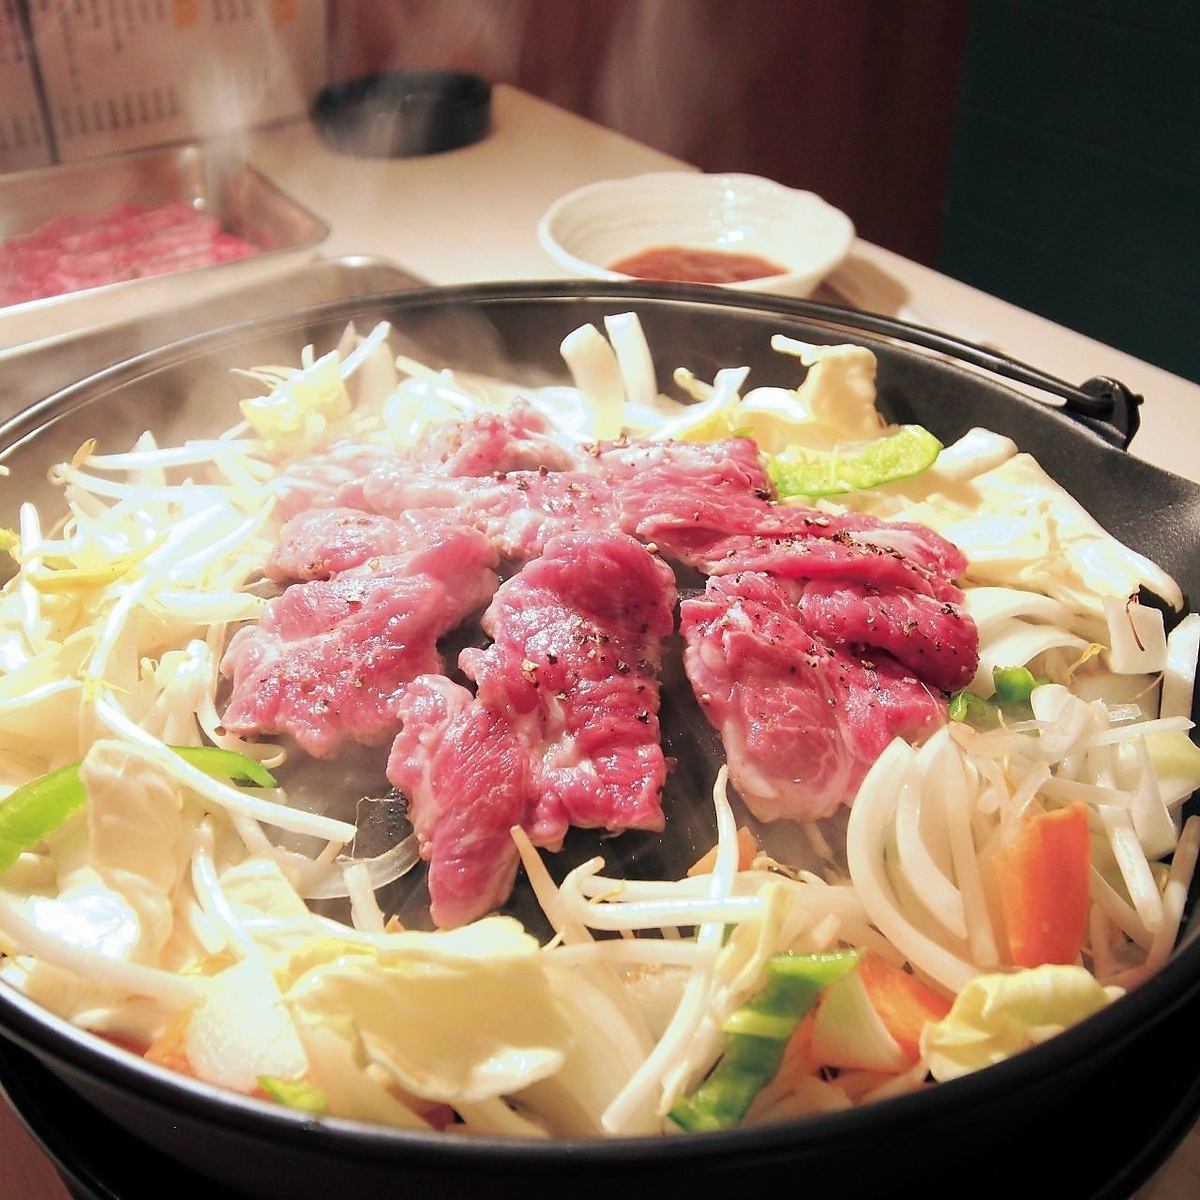 The special sauce brings out the flavor of the meat and brings out the flavor of the lamb even more!